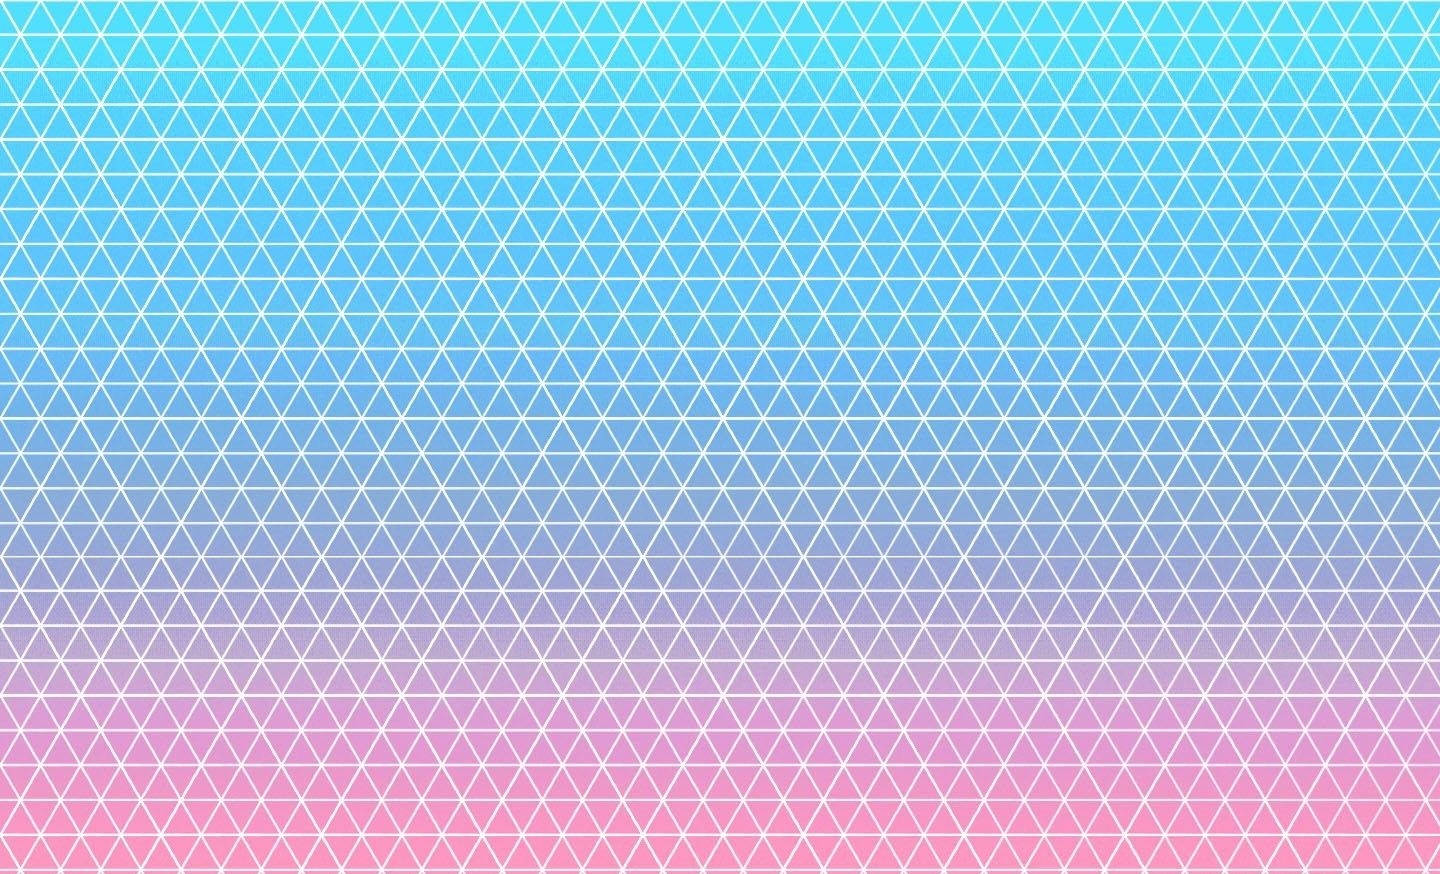 tumblr backgrounds teal